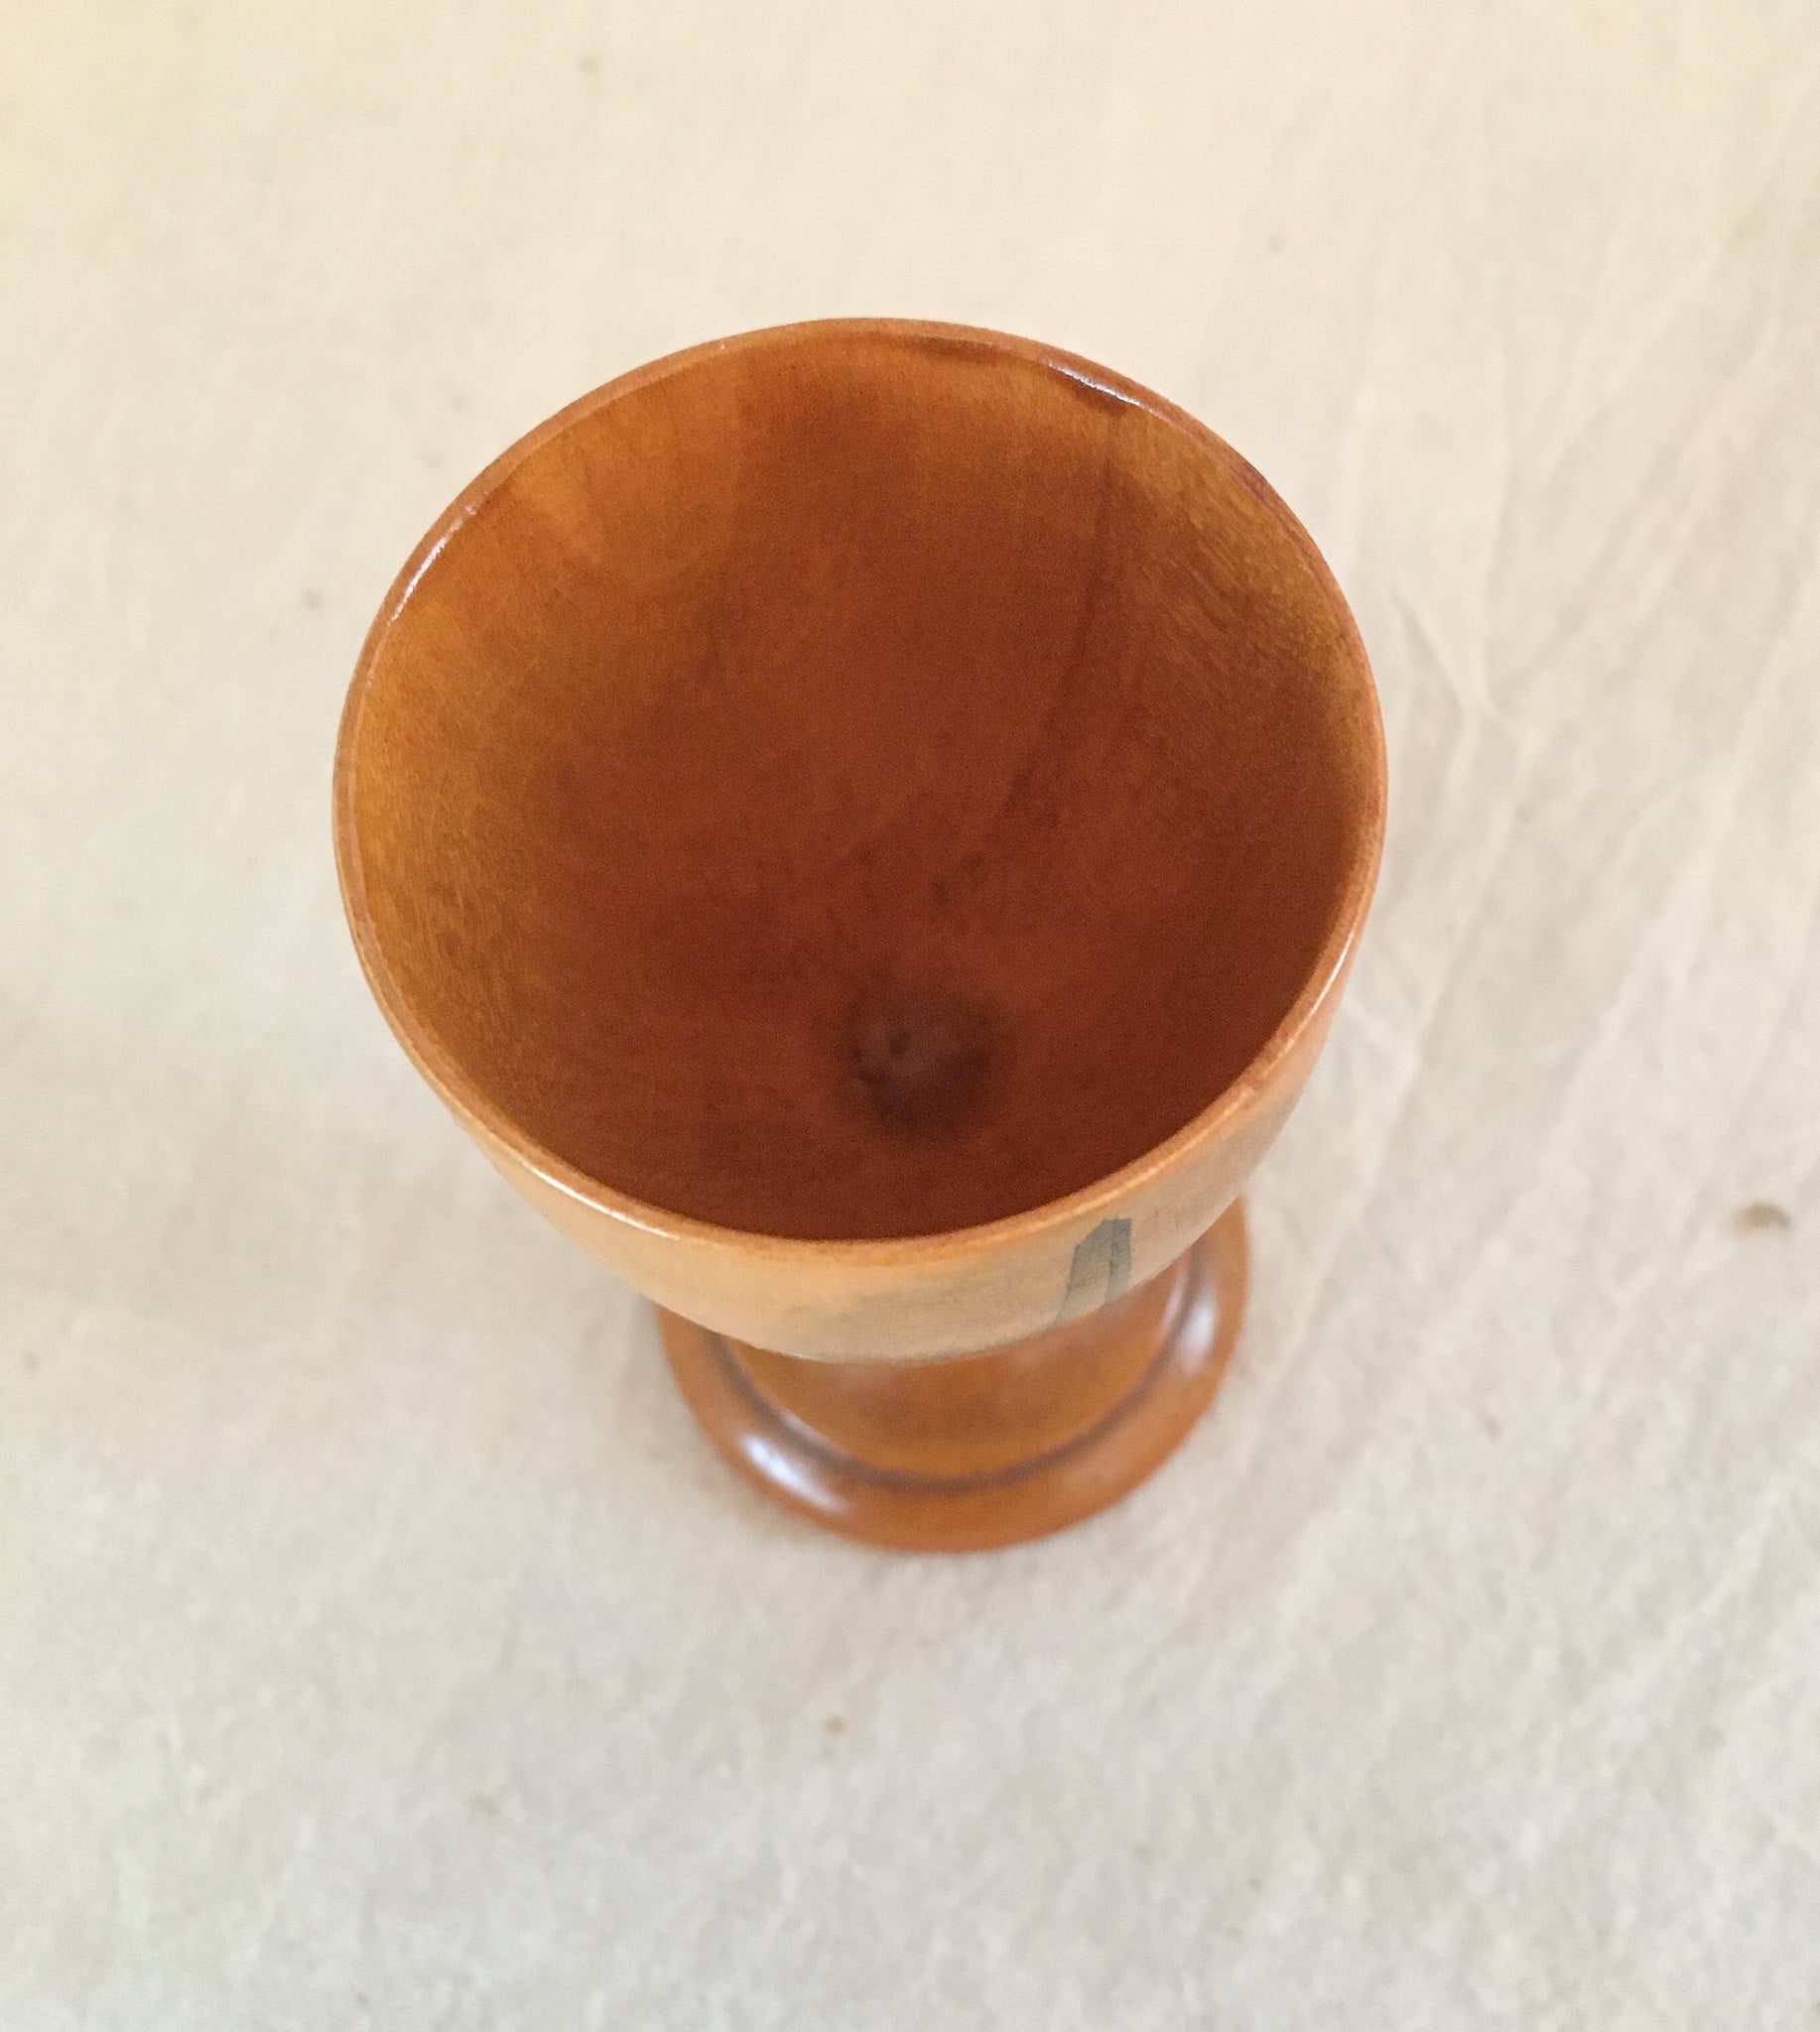 Late 1800’s Mauchline Ware Egg Cup, “Bunker Hill Monument 221 Feet High”